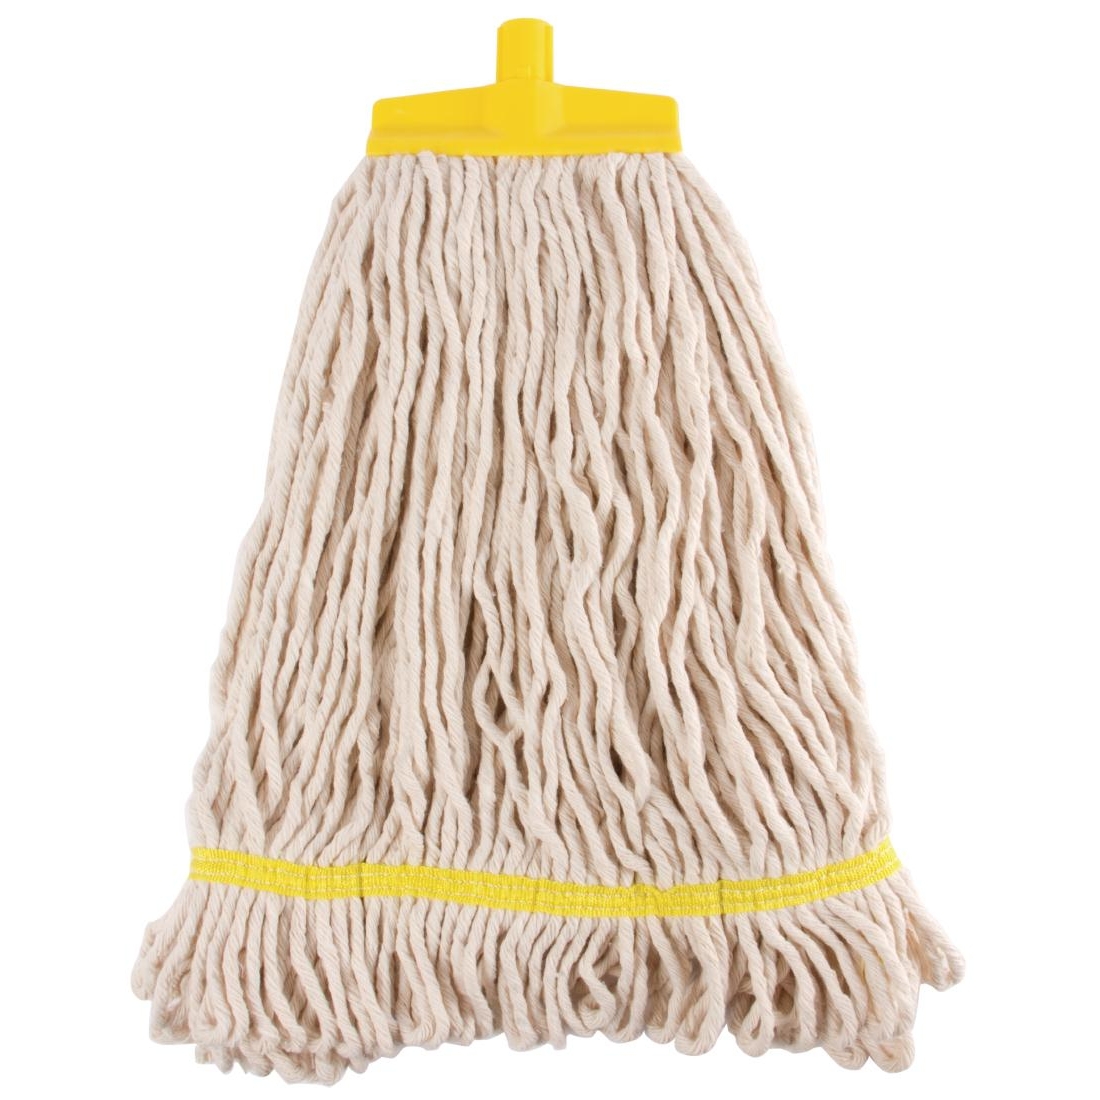 Scot Young SYR Kentucky Mop Head in Yellow Made of Loop Cotton Colour Coded 